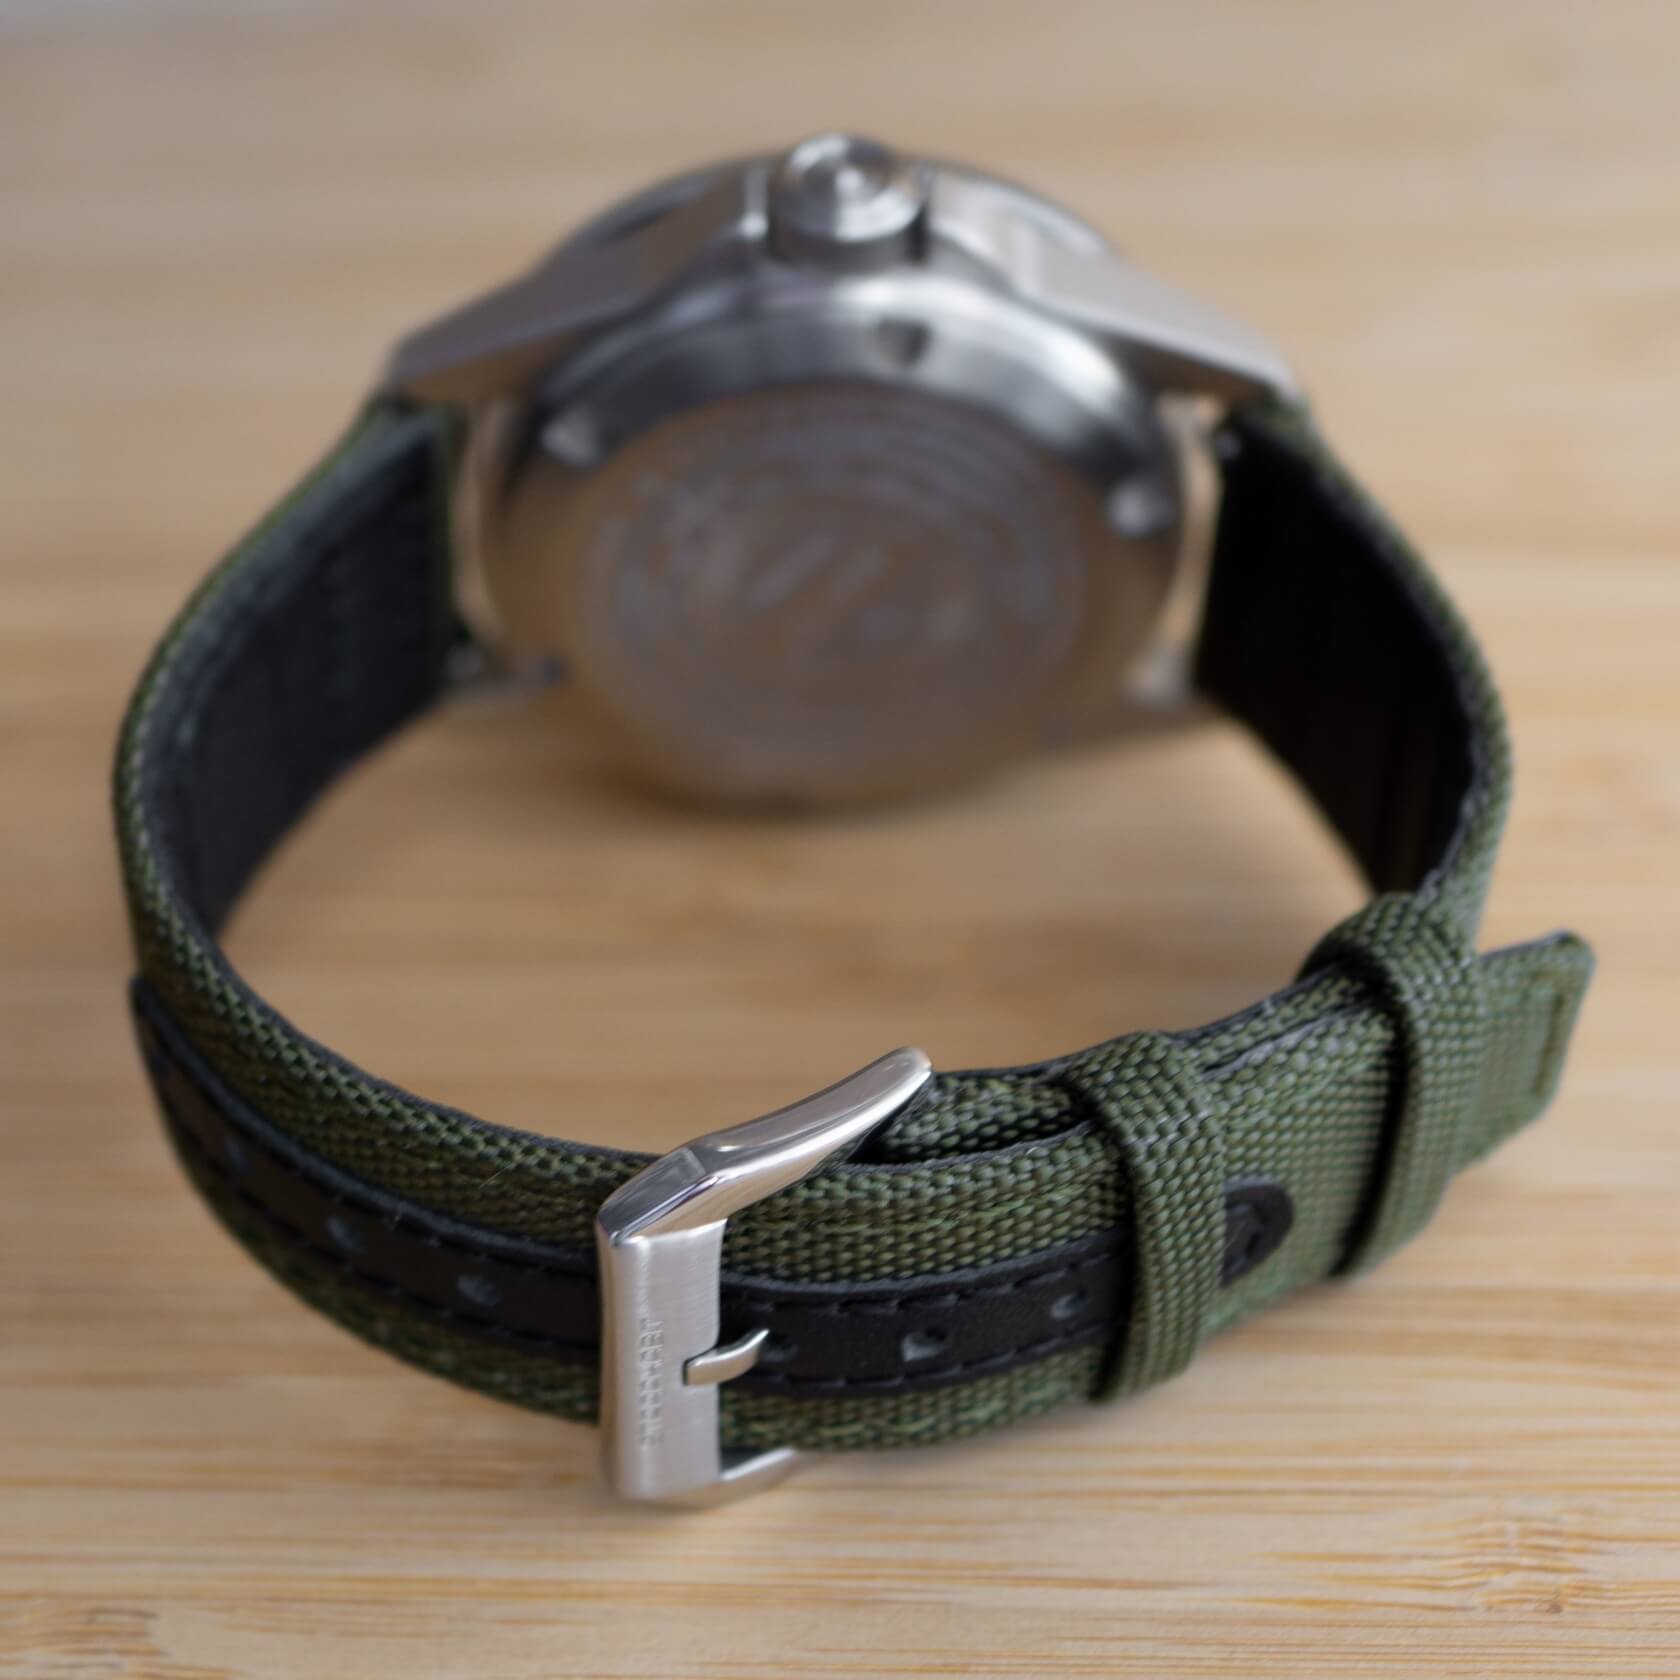 green sailcloth strap fitted on a watch